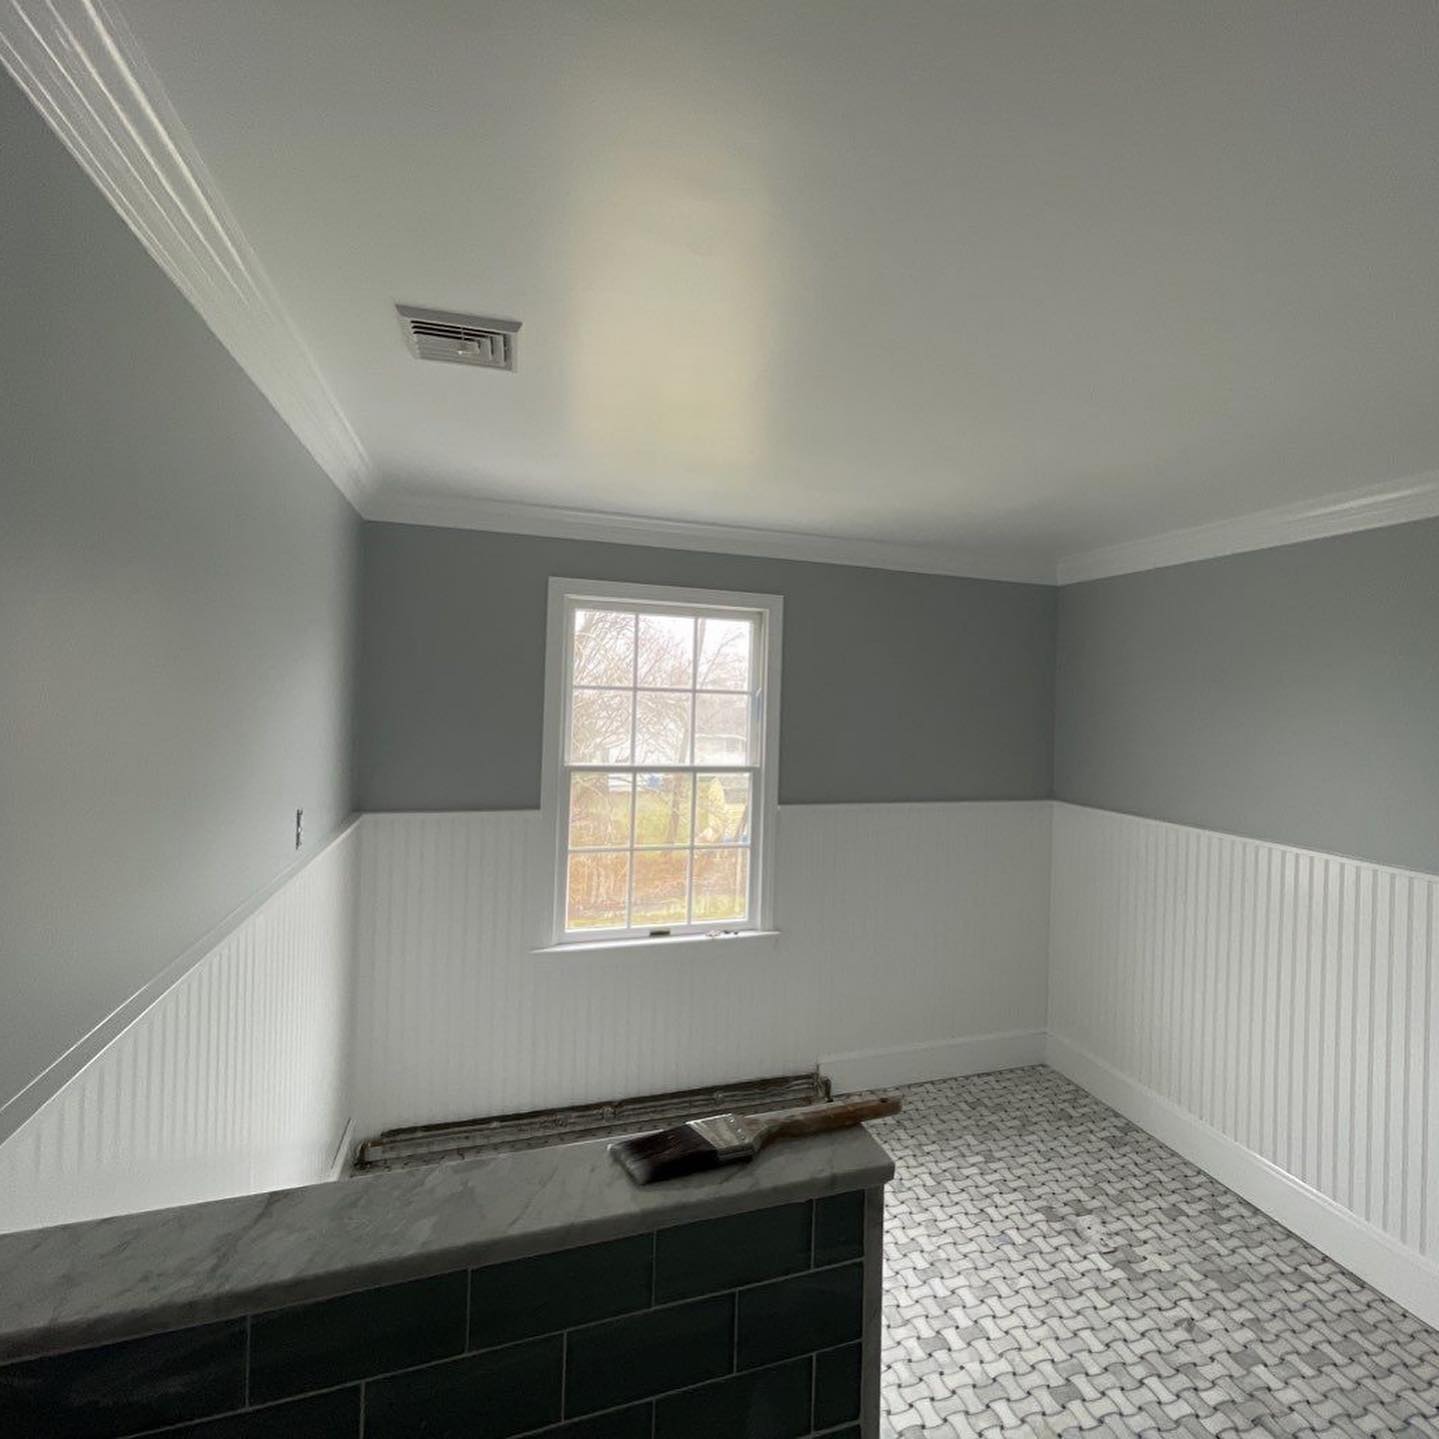 A carpentry project to elevate your home is adding wainscoting to a room.